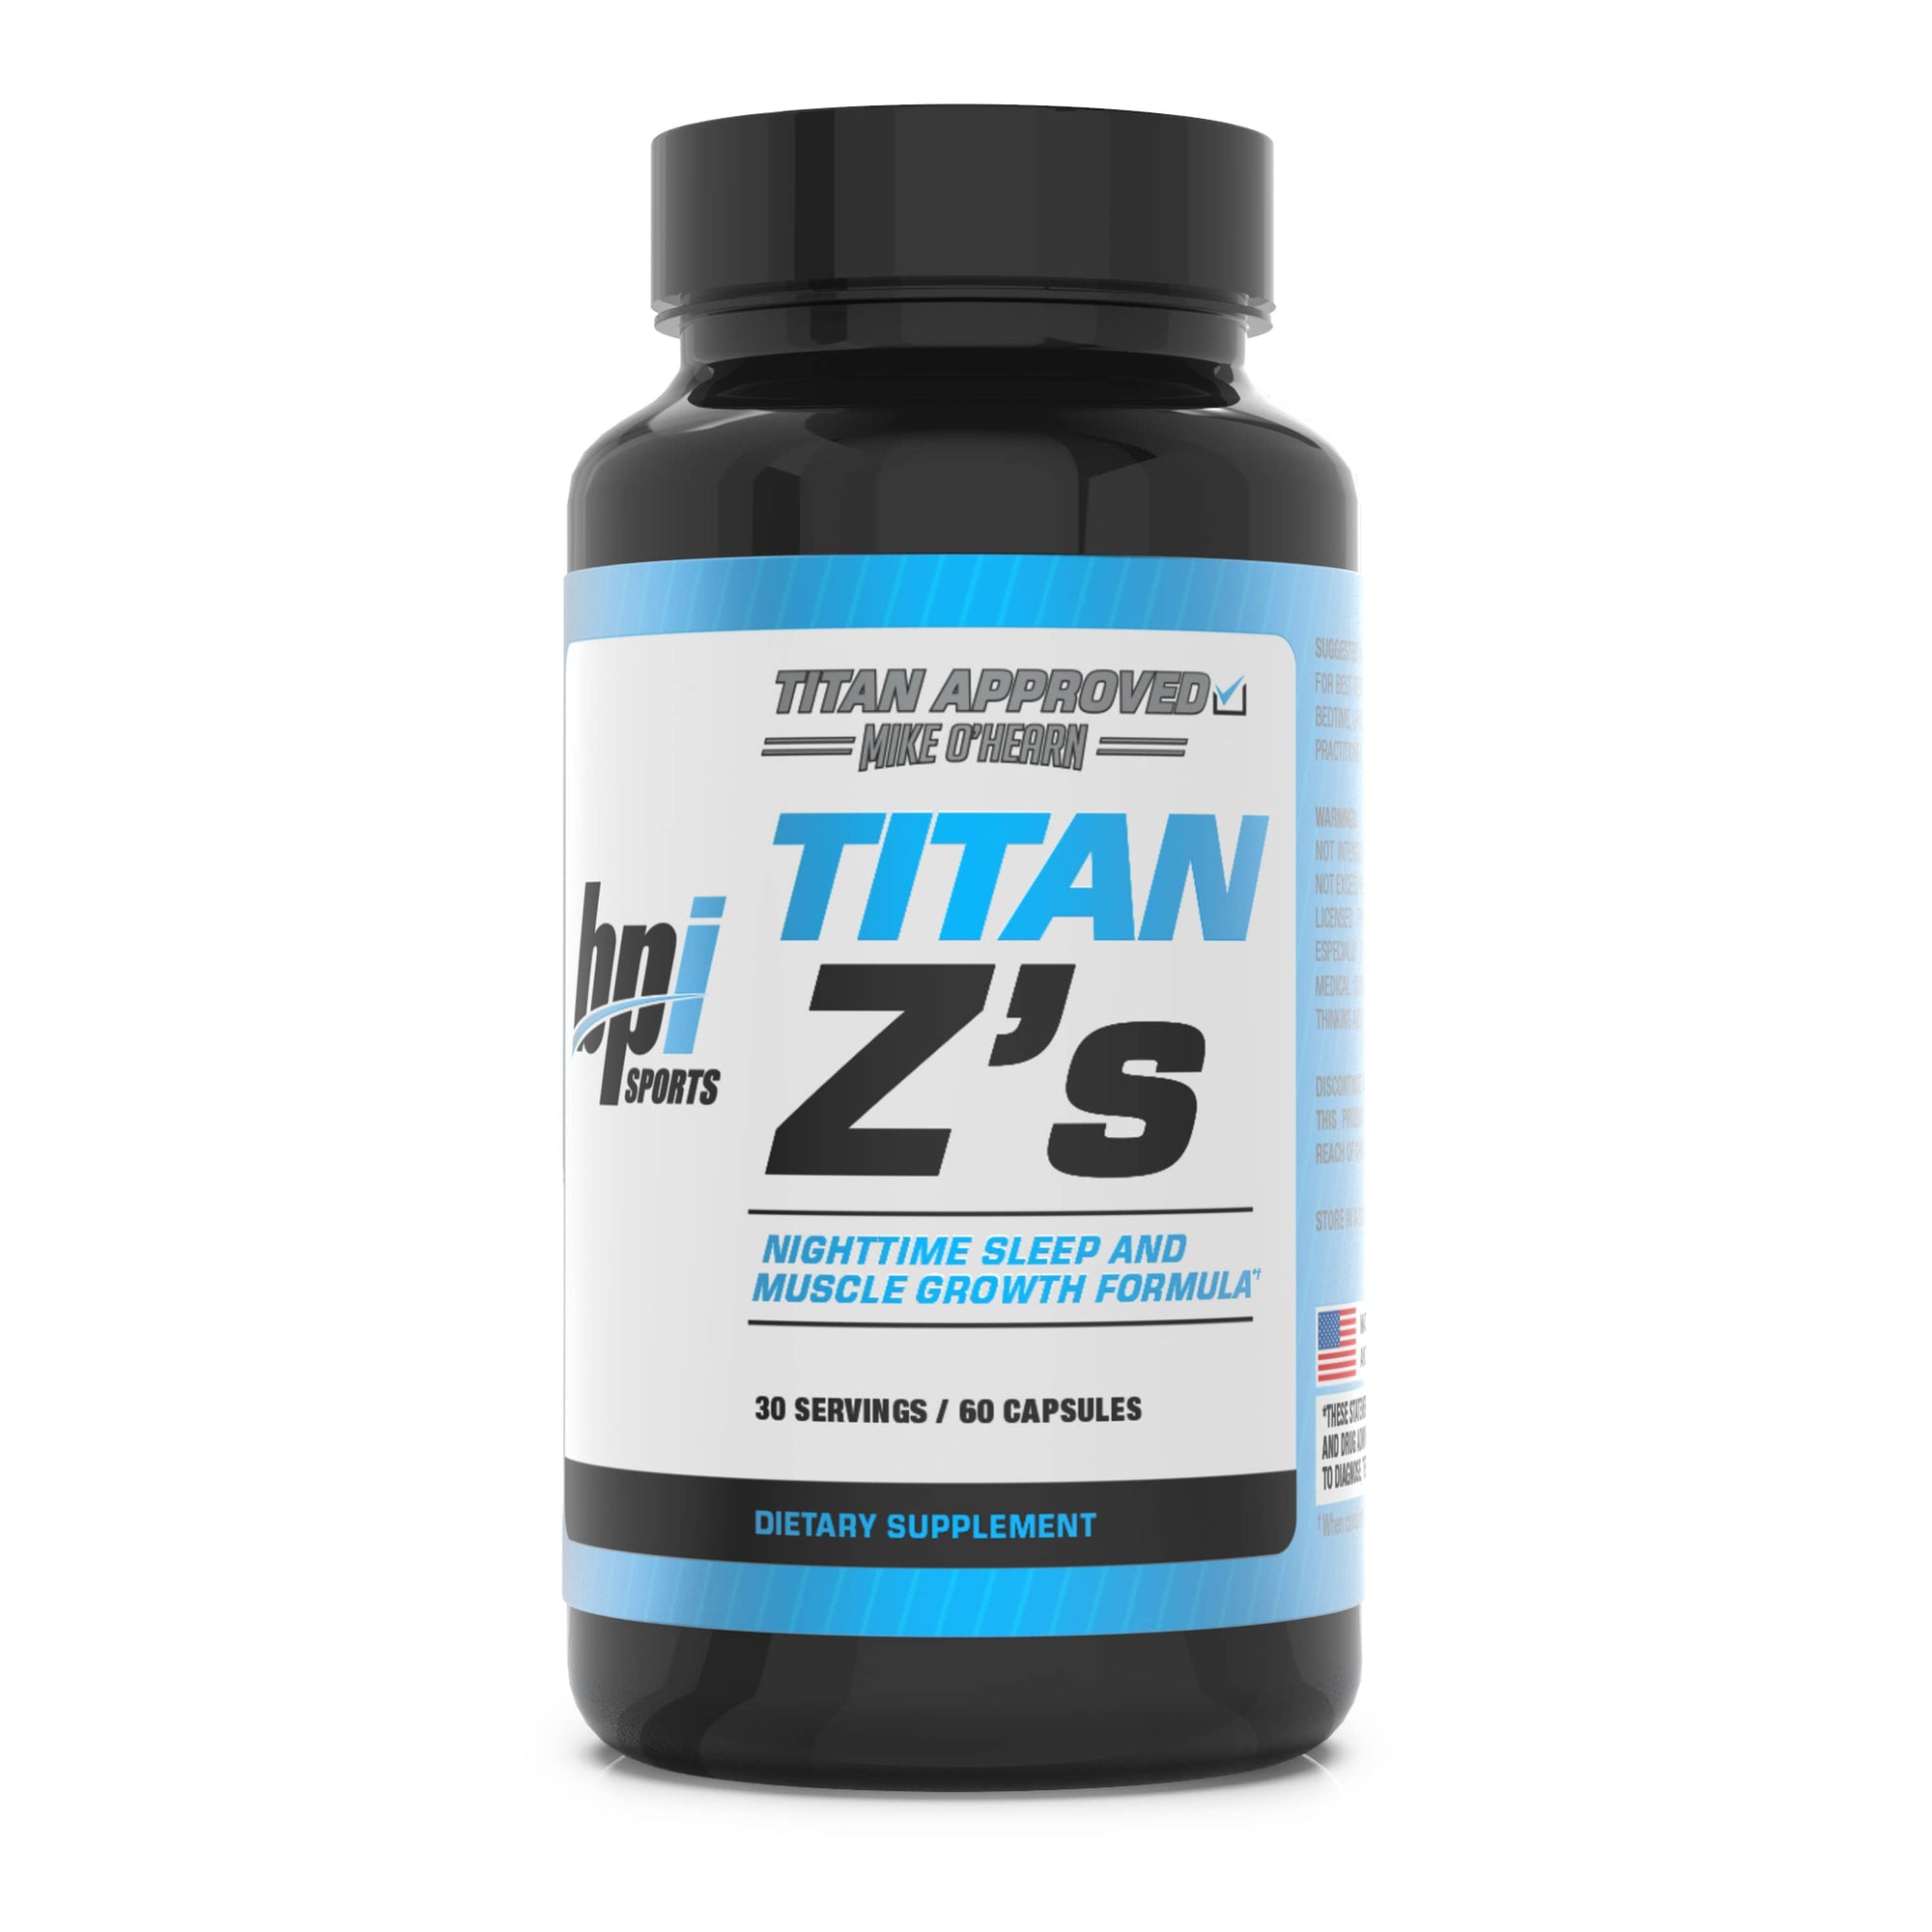 Titan Z's capsule bottle. Nighttime sleep and muscle growth formula 30 servings / 60 capsules